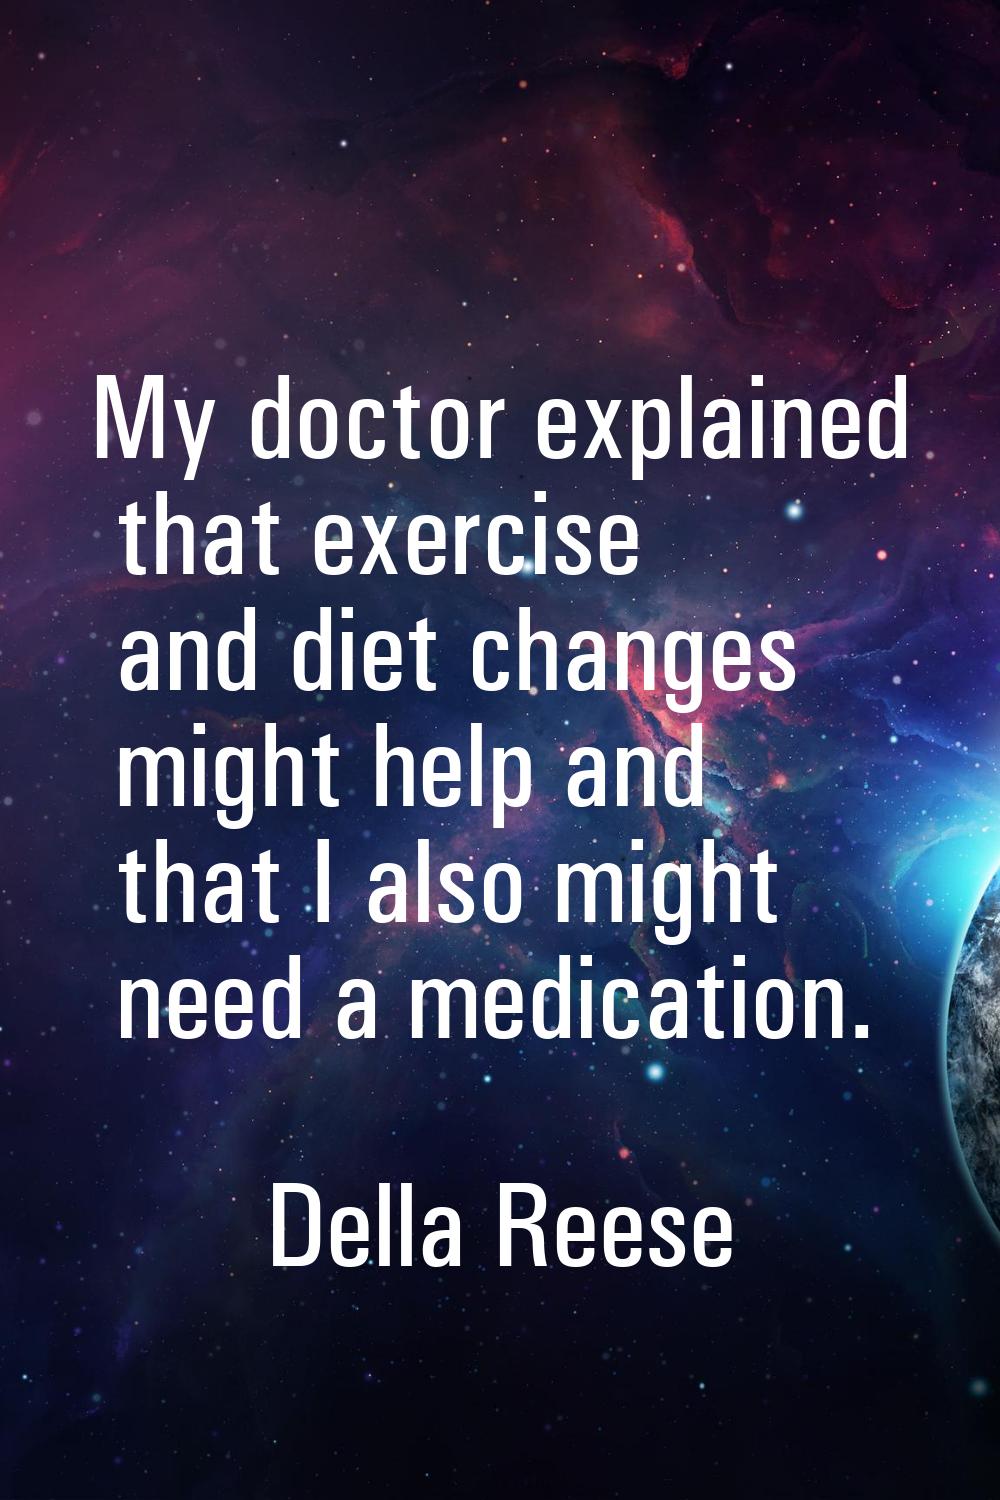 My doctor explained that exercise and diet changes might help and that I also might need a medicati